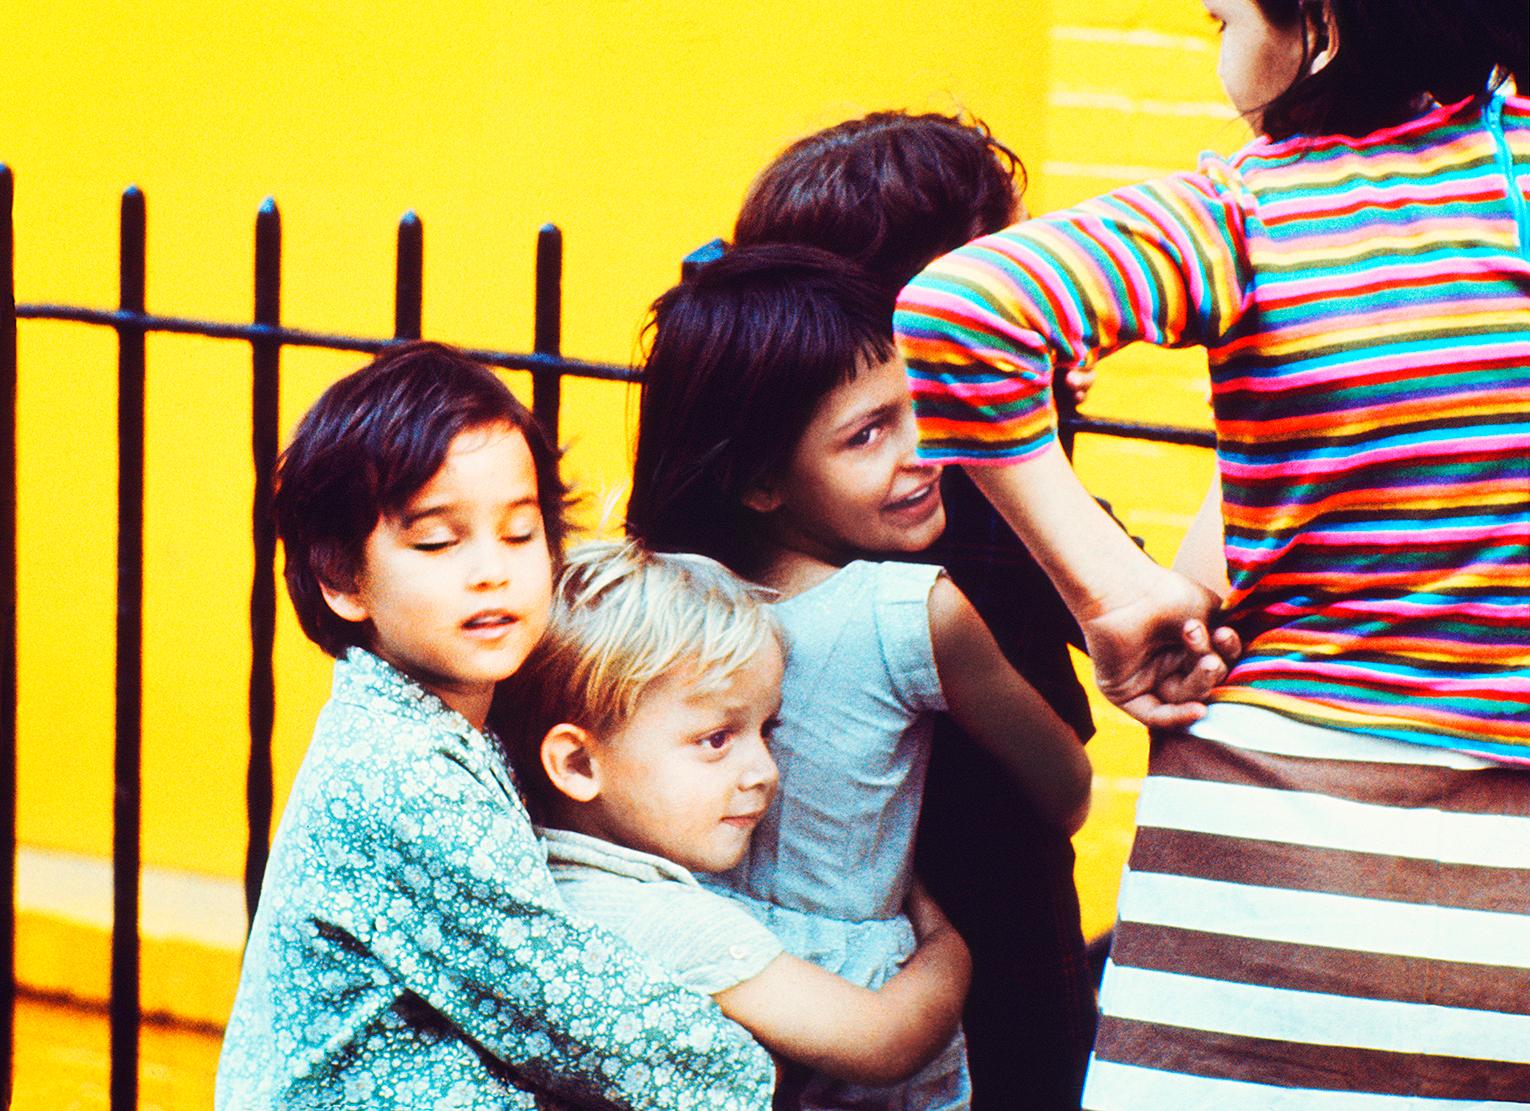 Kids having Fun in front East Village Yellow Wall, Street Photography in Color 